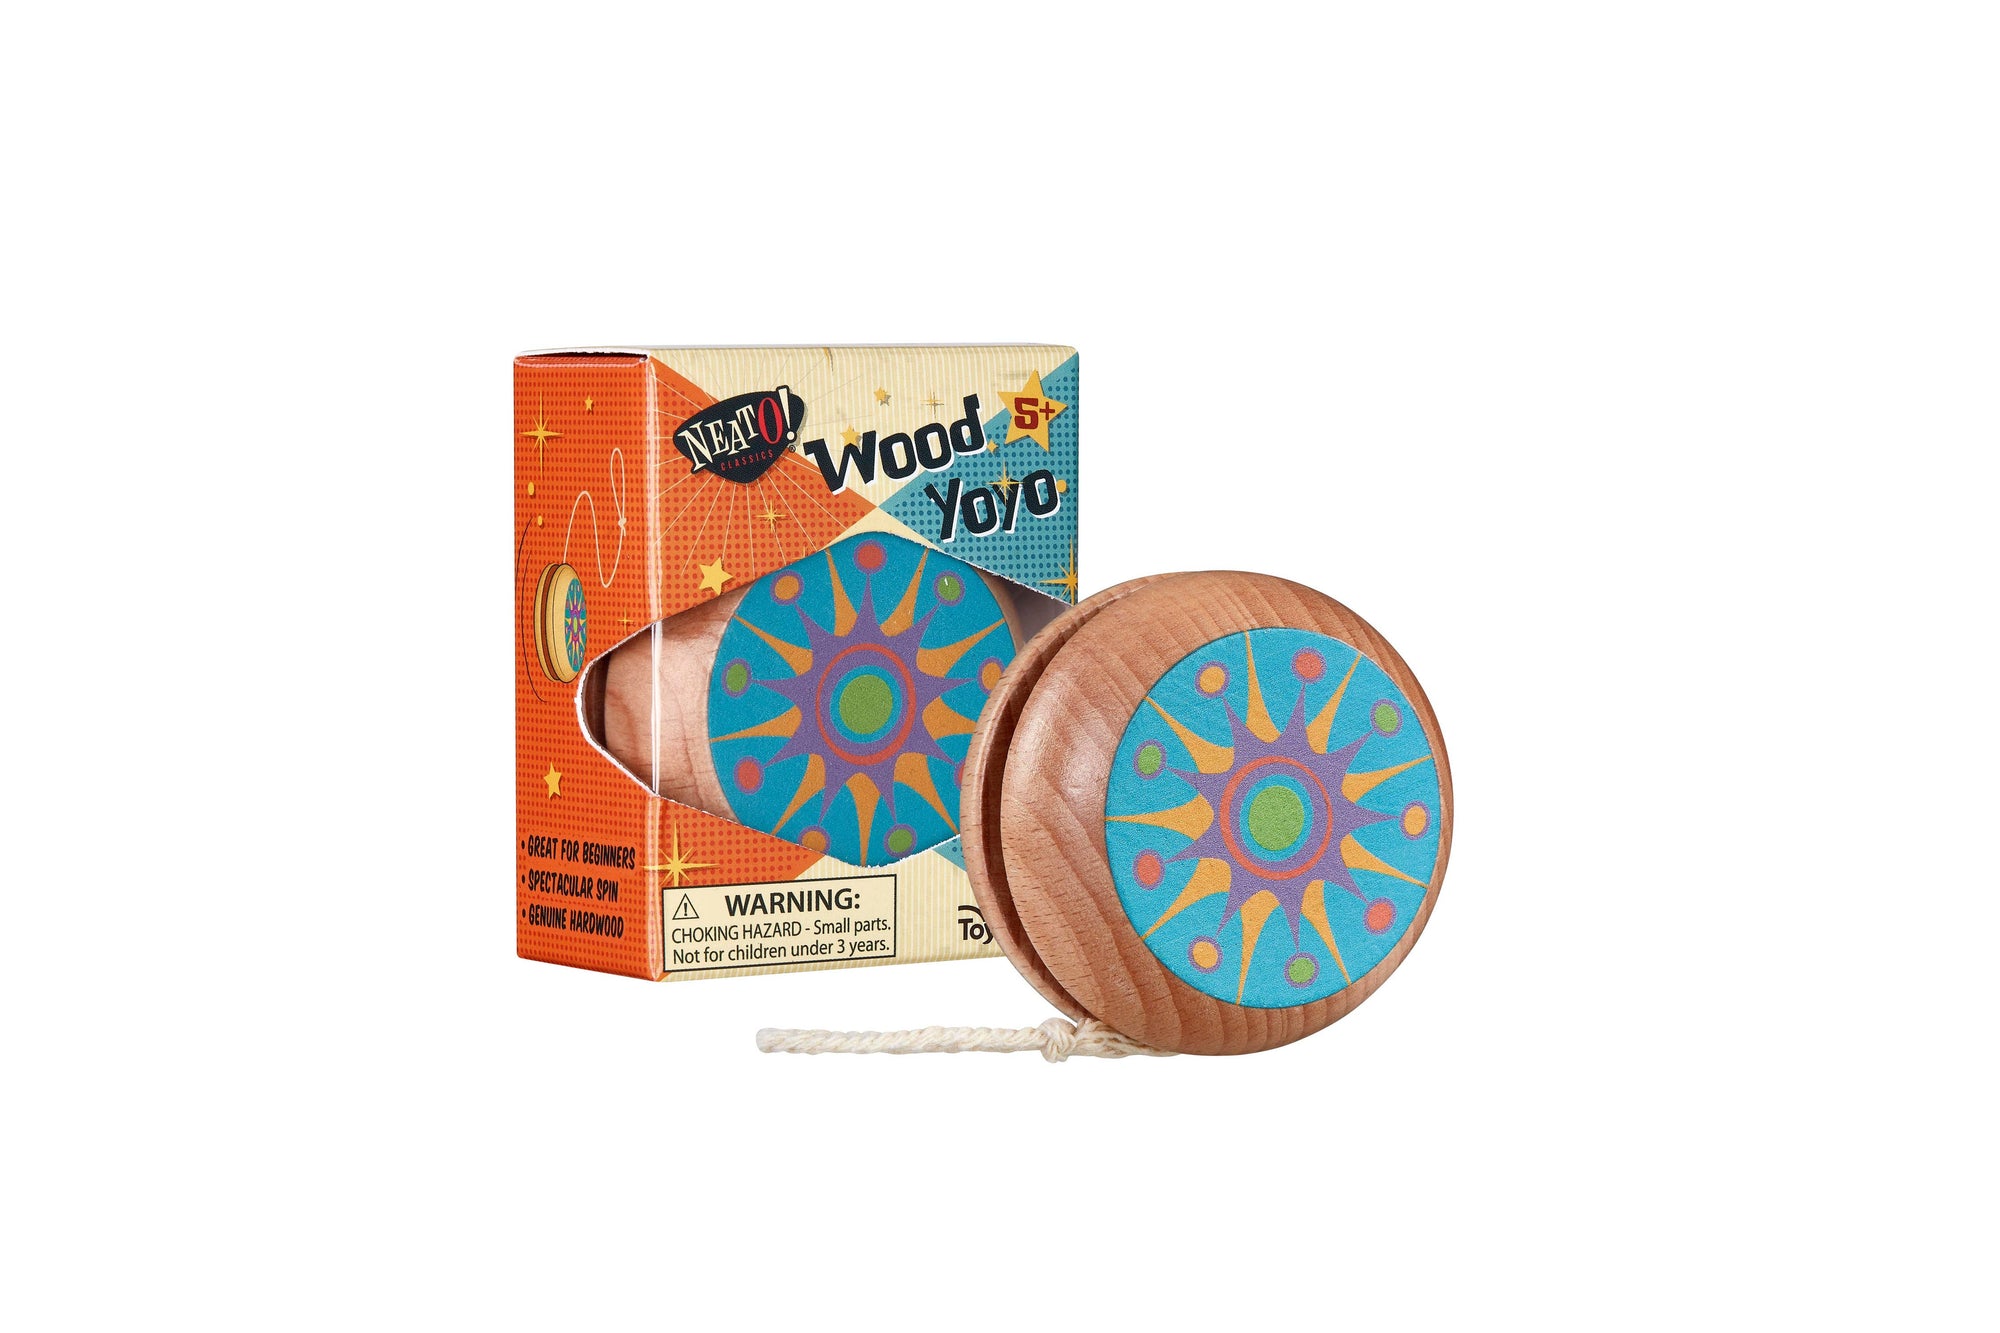 A classic Neato! Wood Yo-Yo with a blue and orange pattern, displayed next to its packaging box with Neato! Classics retro graphics.